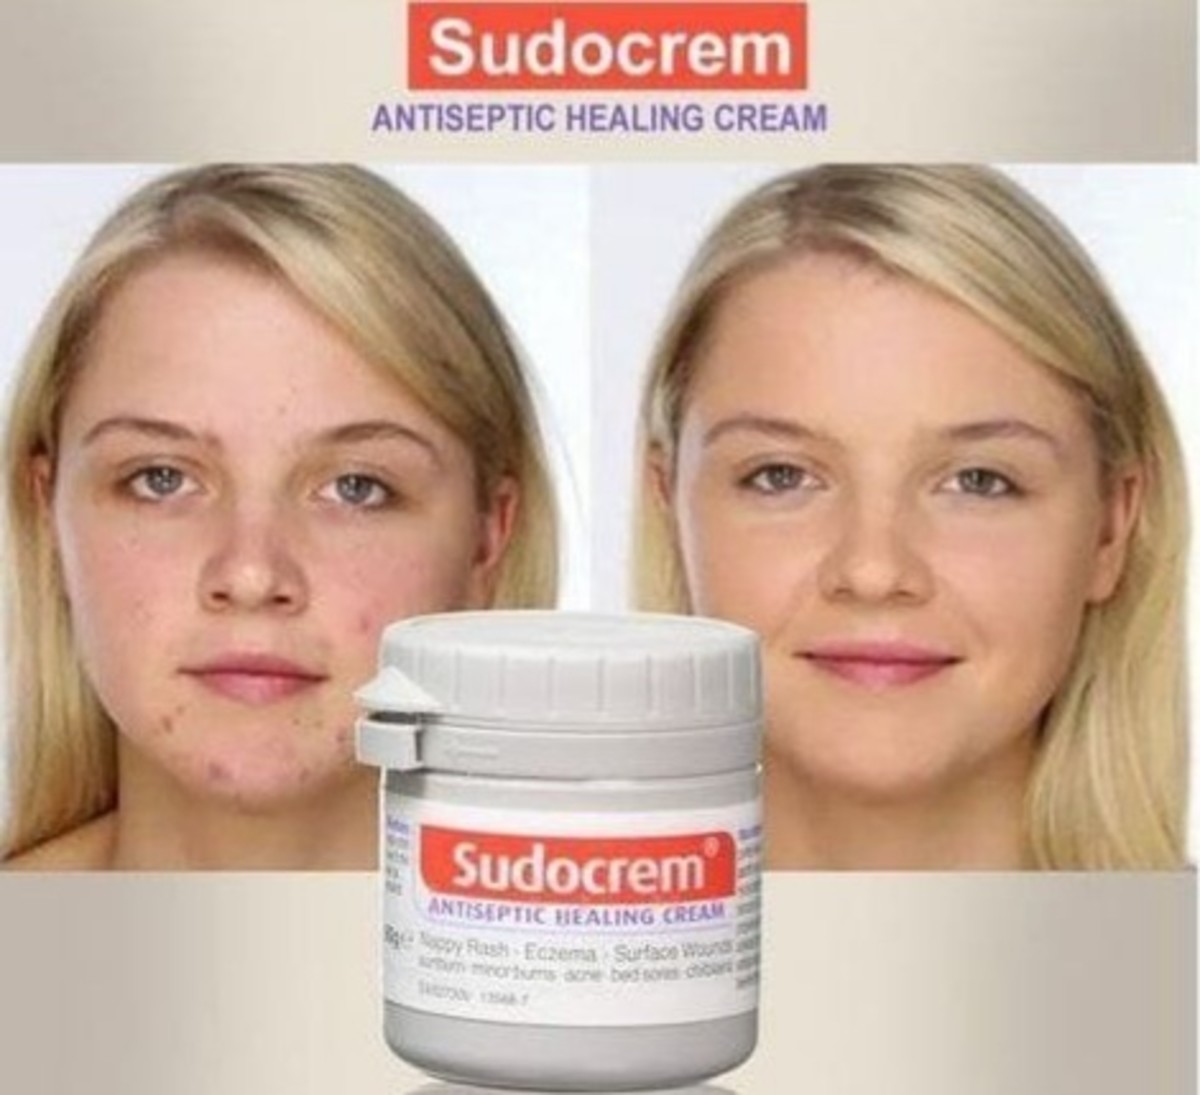 Sudocrem Uses and Benefits on Acne Prone Skin and Acne Scars